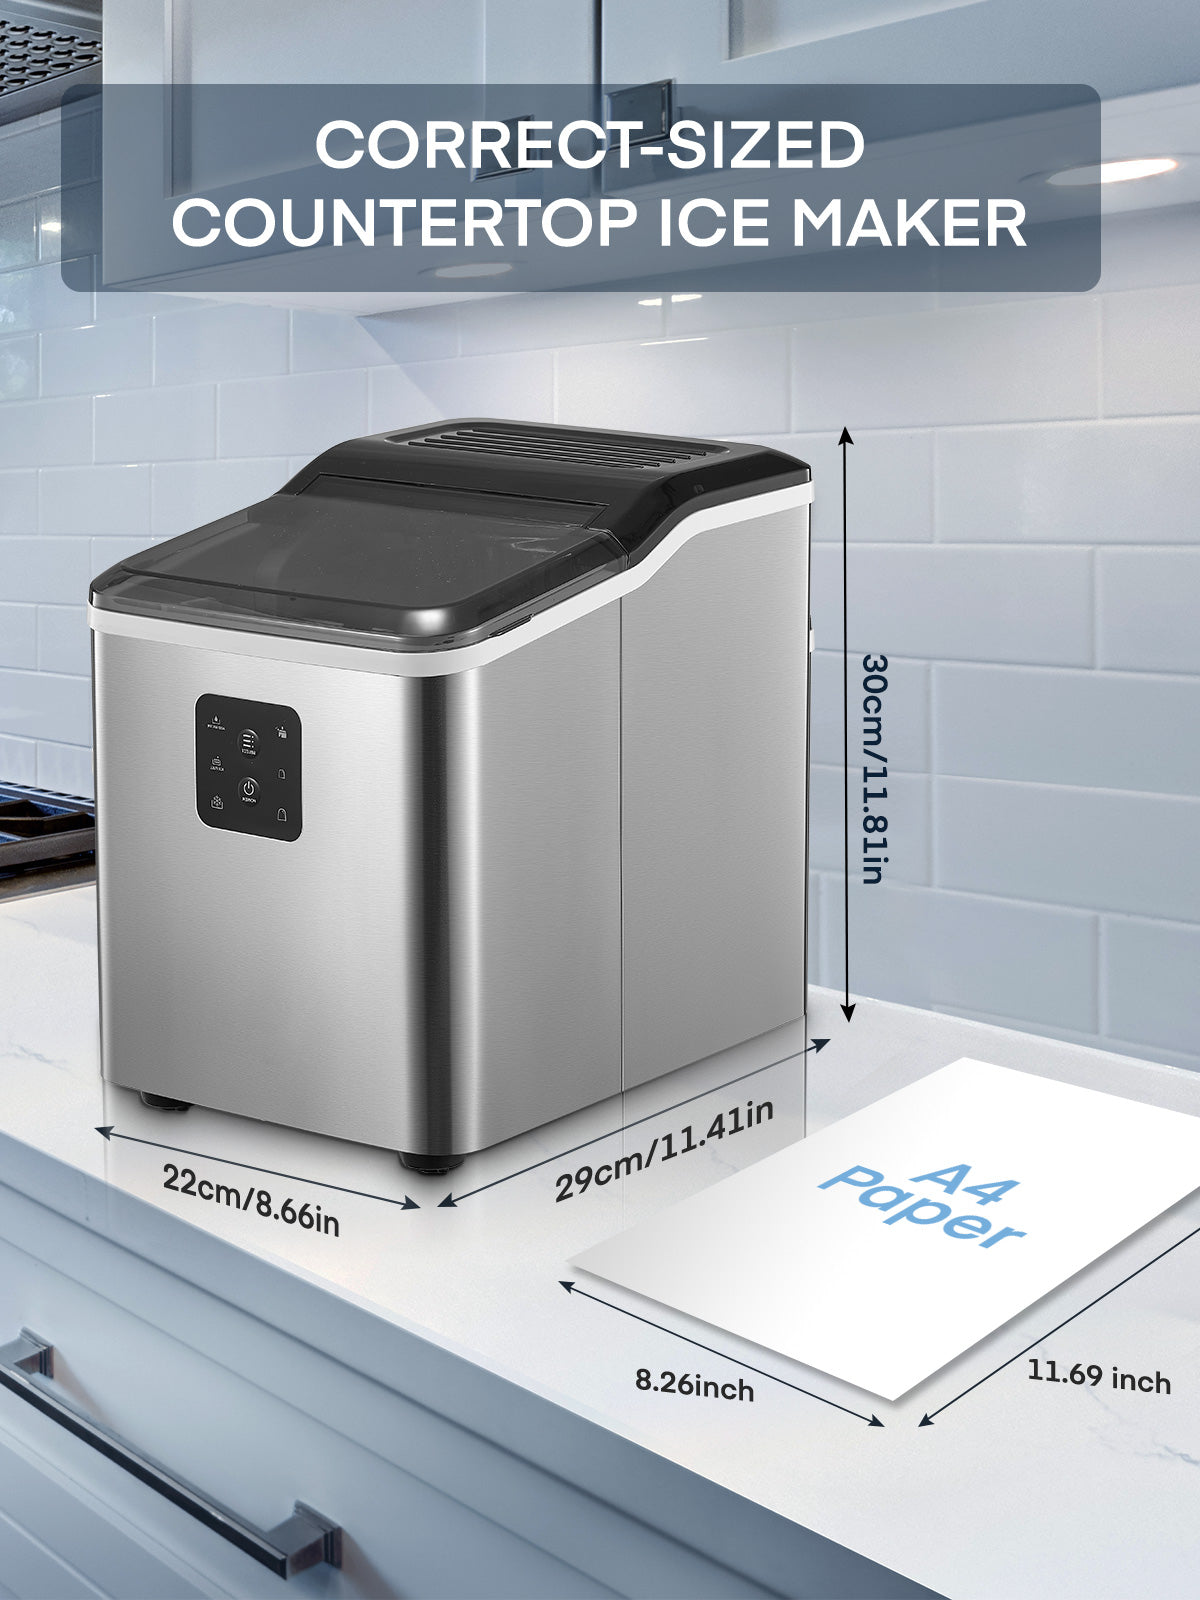 Ice Makers Countertop Stainless Steel, 28lbs in 24Hrs, 9 Cubes Ready in 6 Mins, Self-Clean Portable Ice Maker Machine, 2 Sizes of Bullet Ice for Home Office Bar Party, LED Display